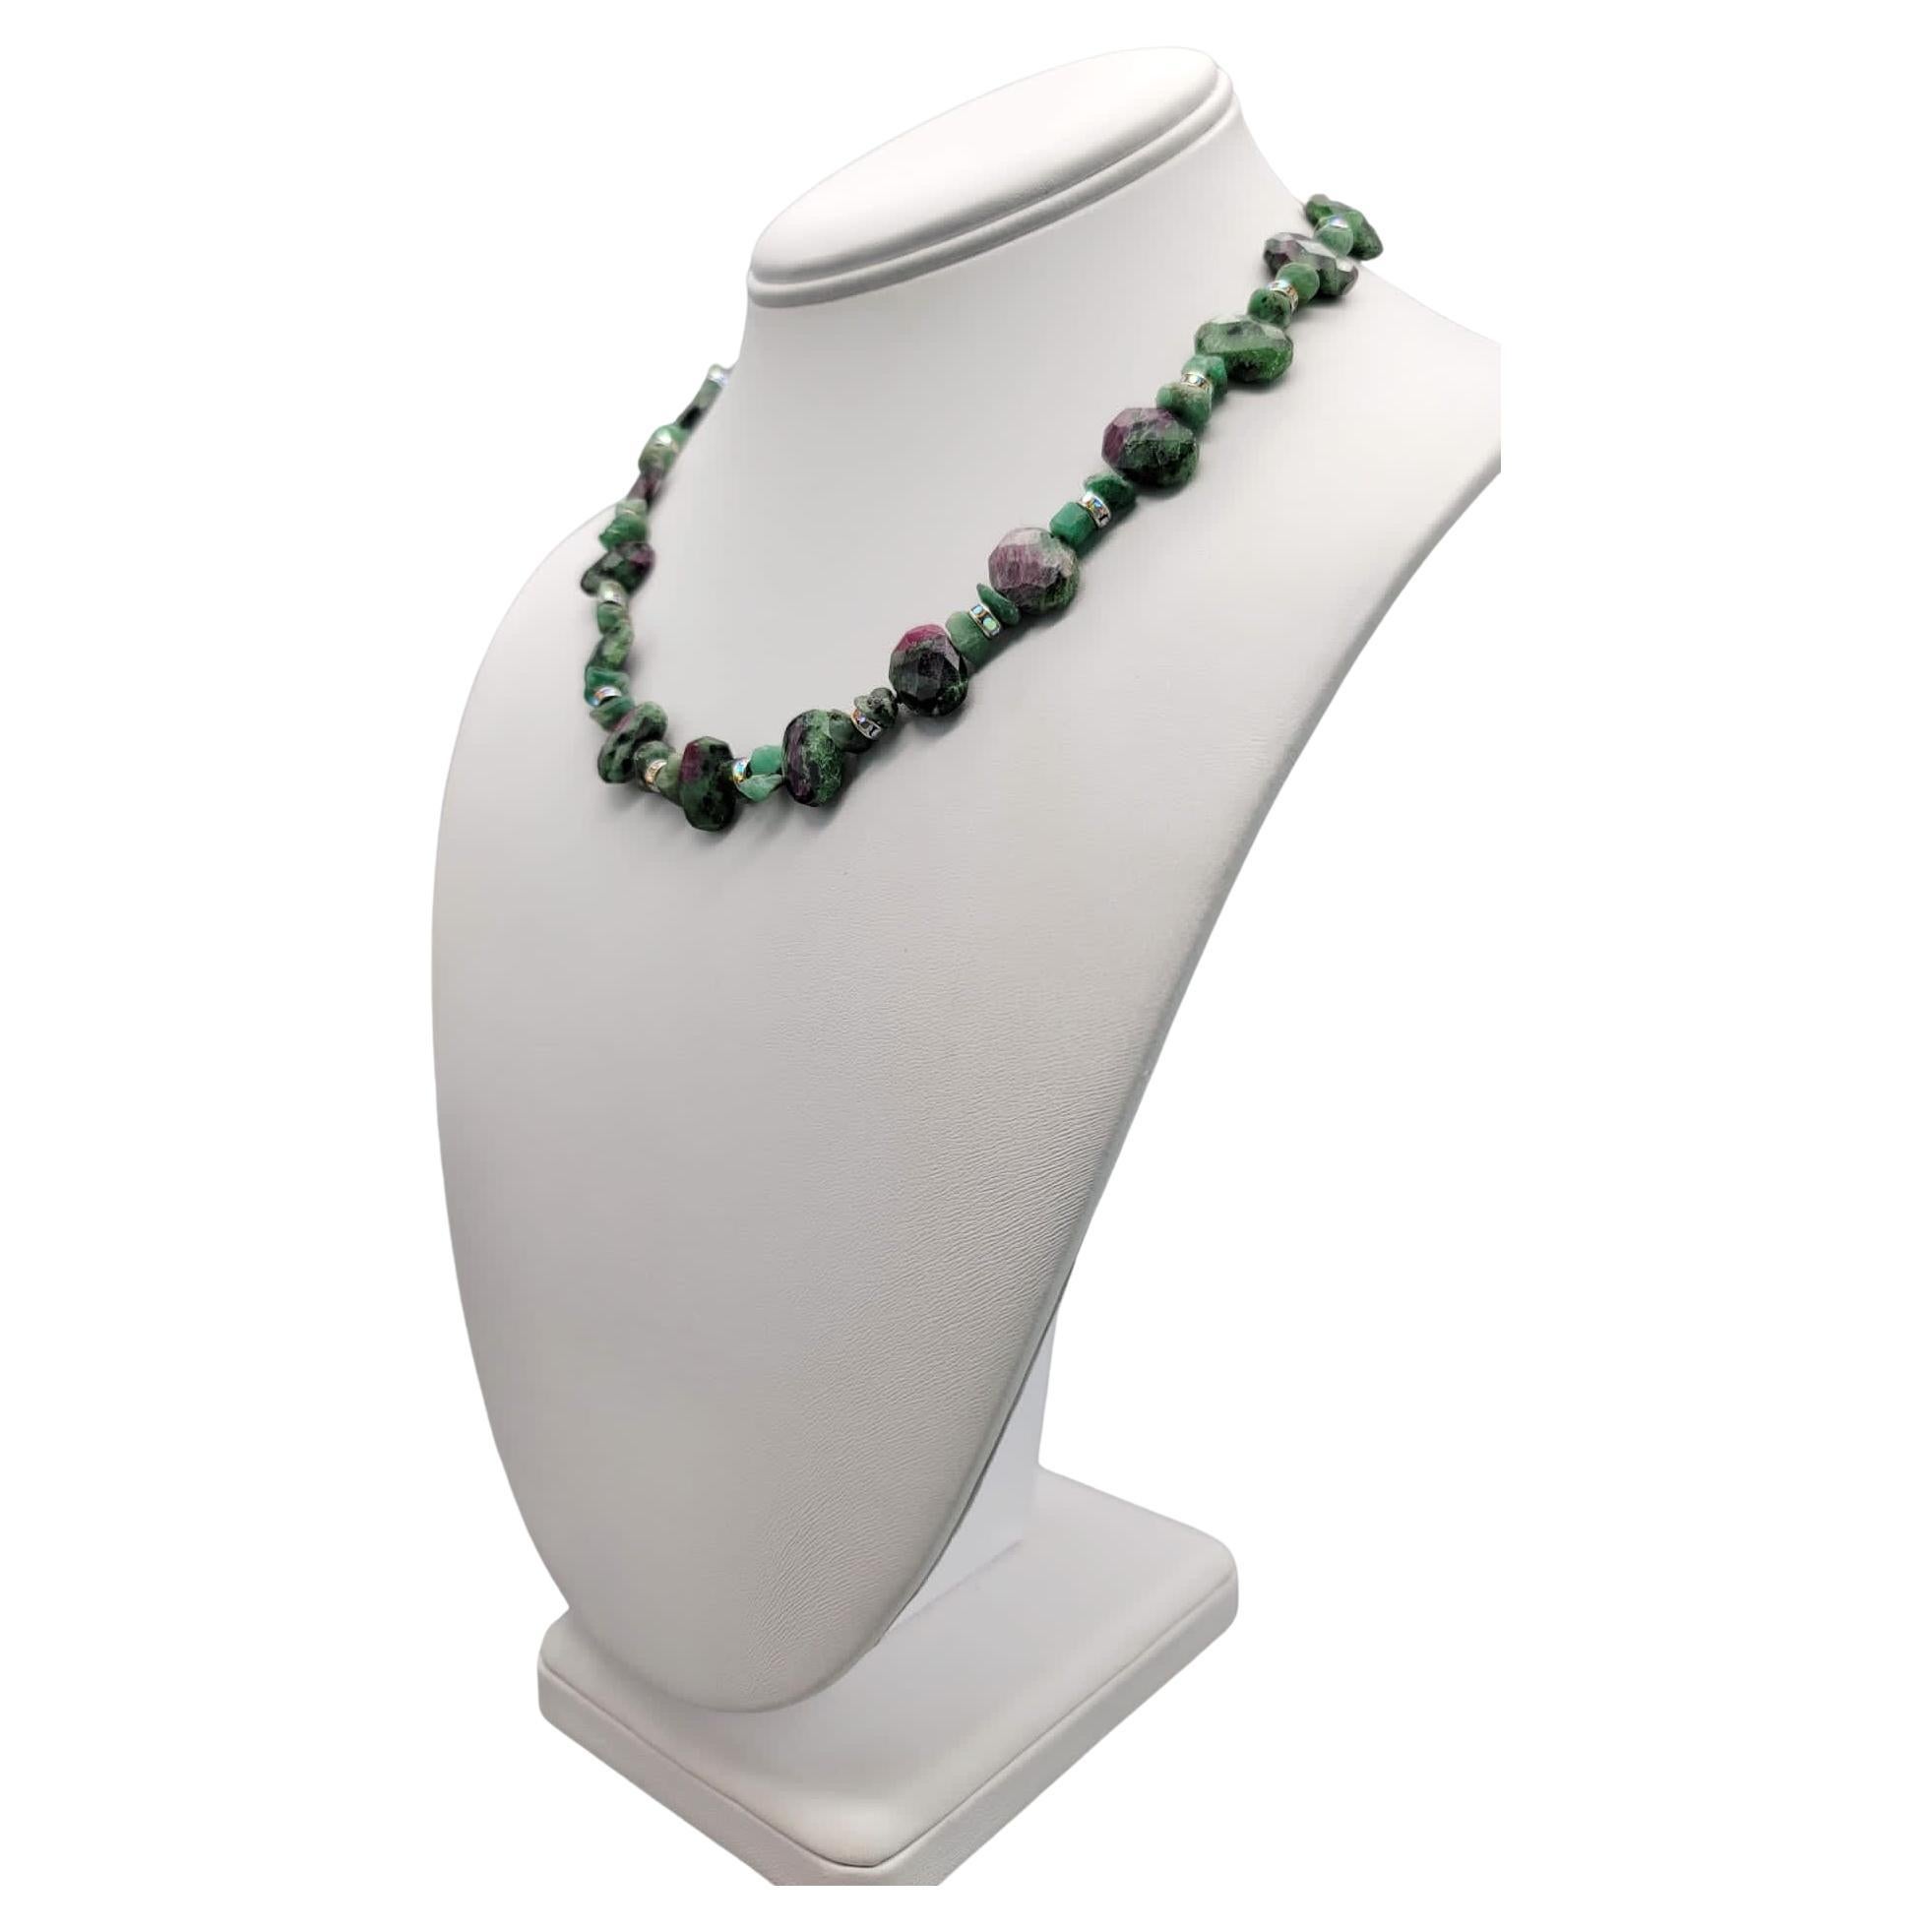 Mixed Cut A.Jeschel Ruby in Zoisite and Emerald necklace.